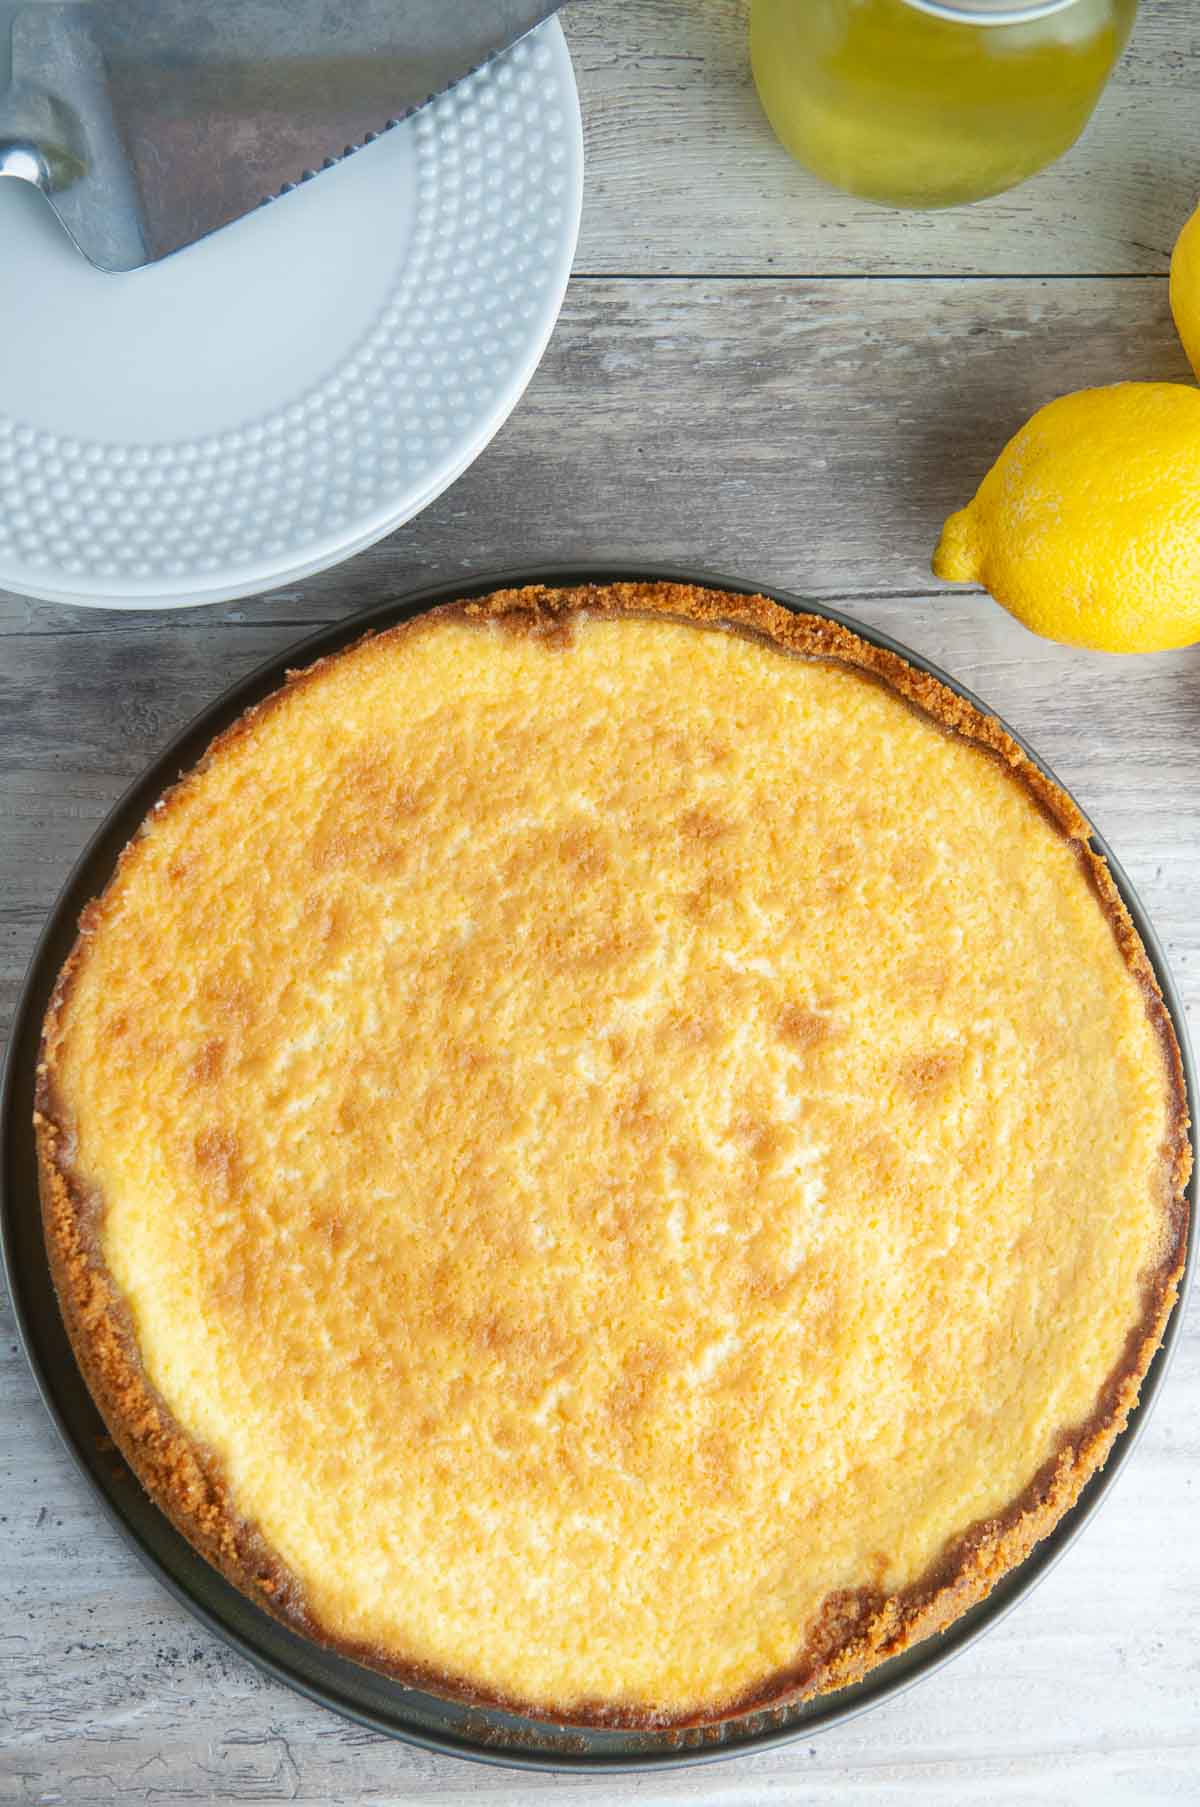 Limoncello cheesecake use the popular Italian liqueur to create a bright but decadent dessert you're sure to love. For extra authenticity and creamy richness, this lemon cheesecake uses Italian mascarpone and ricotta cheese.